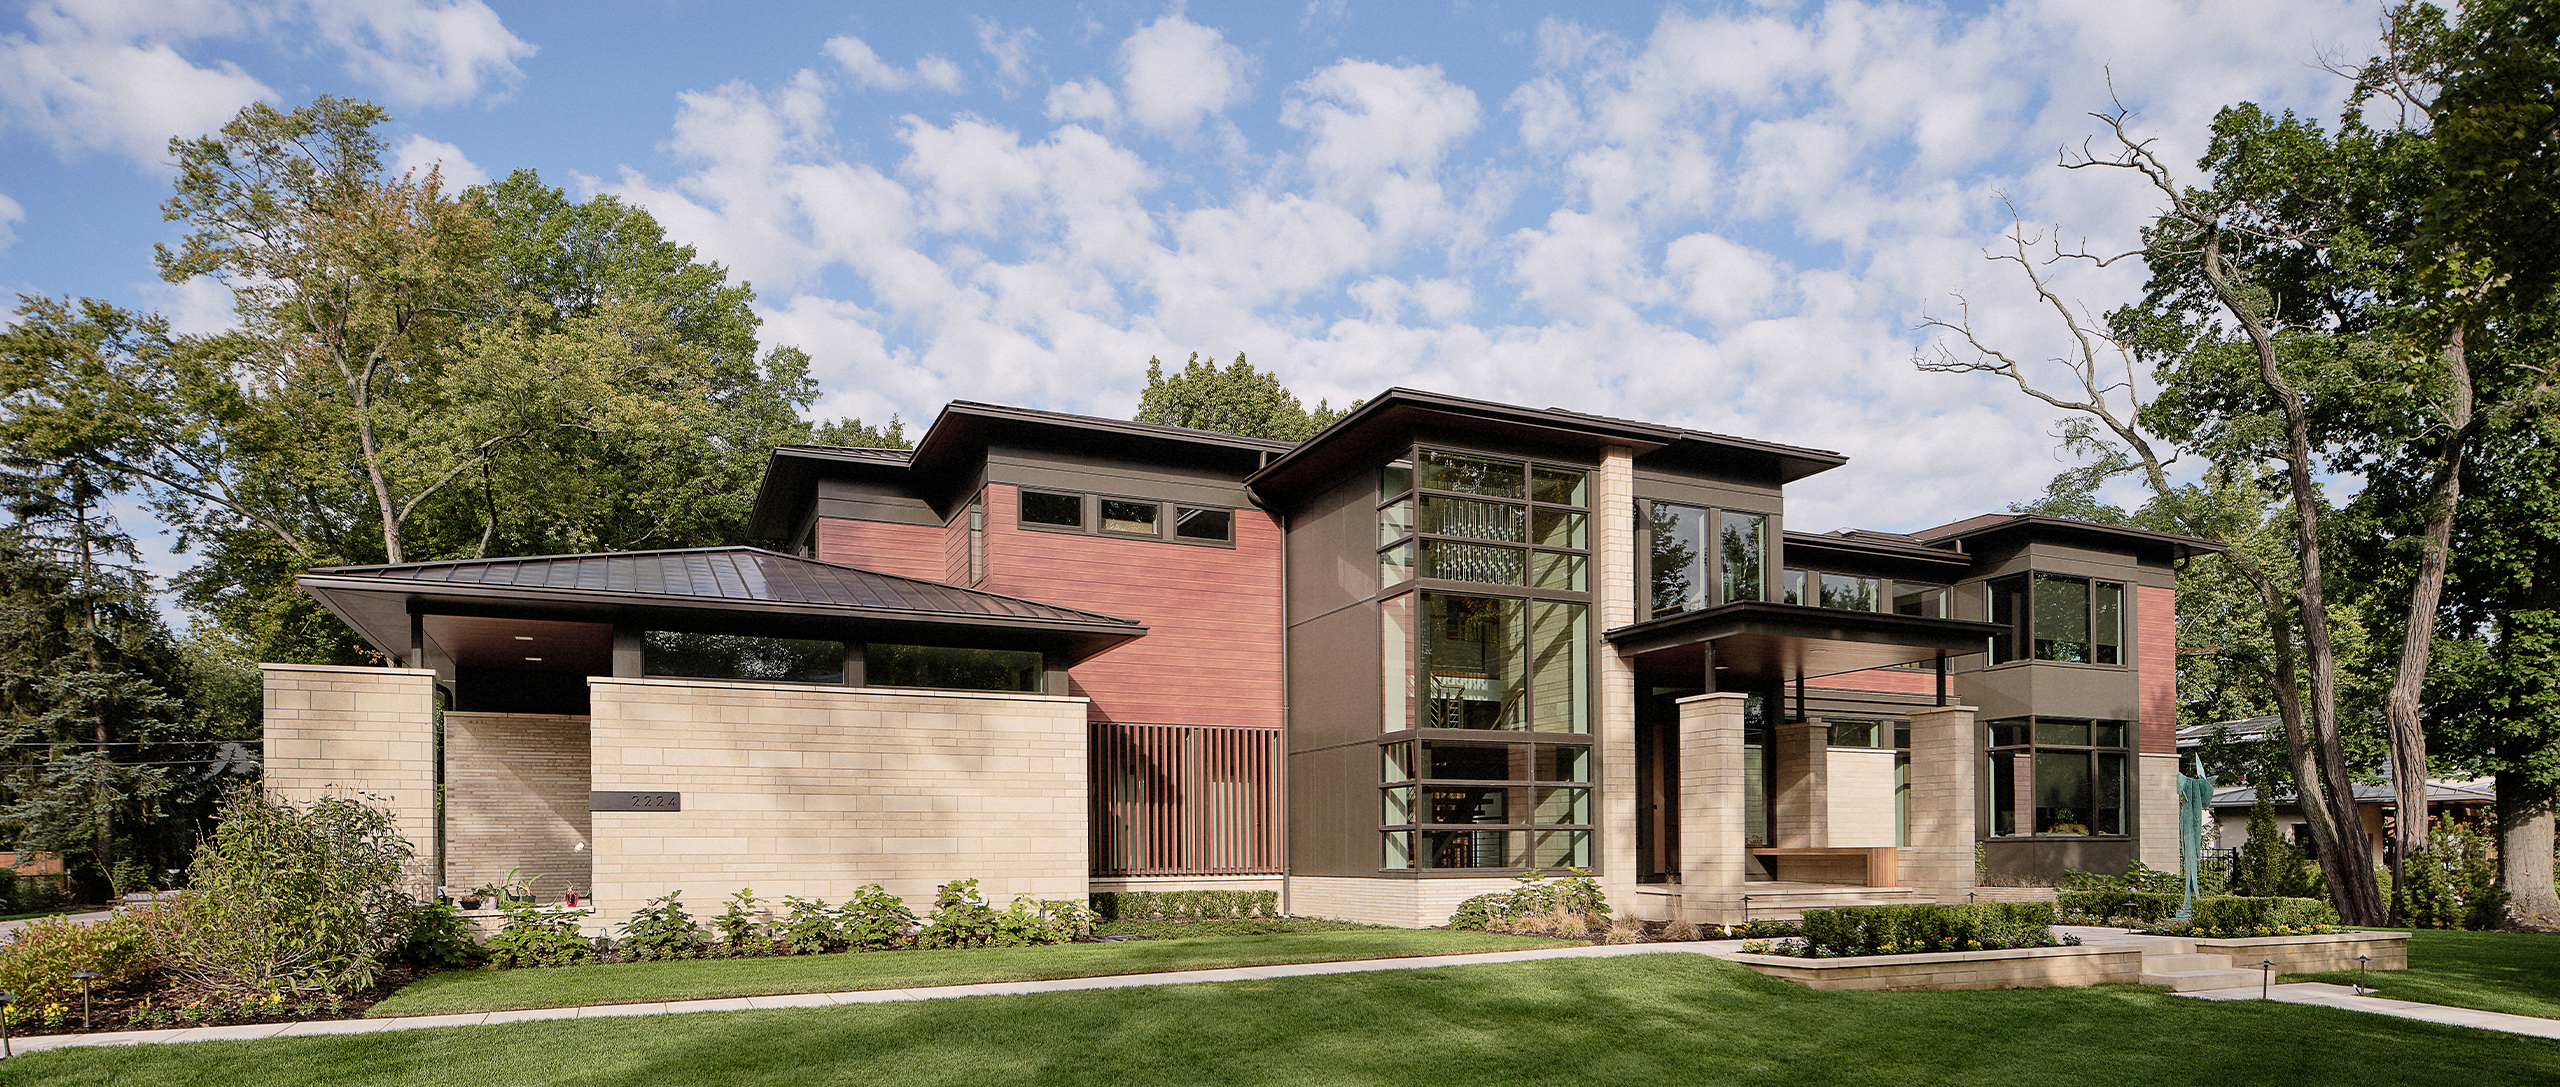 Ambler-Heights-Organic-Contemporary-Evergreen-Homes-Ohio-Project-Exterior